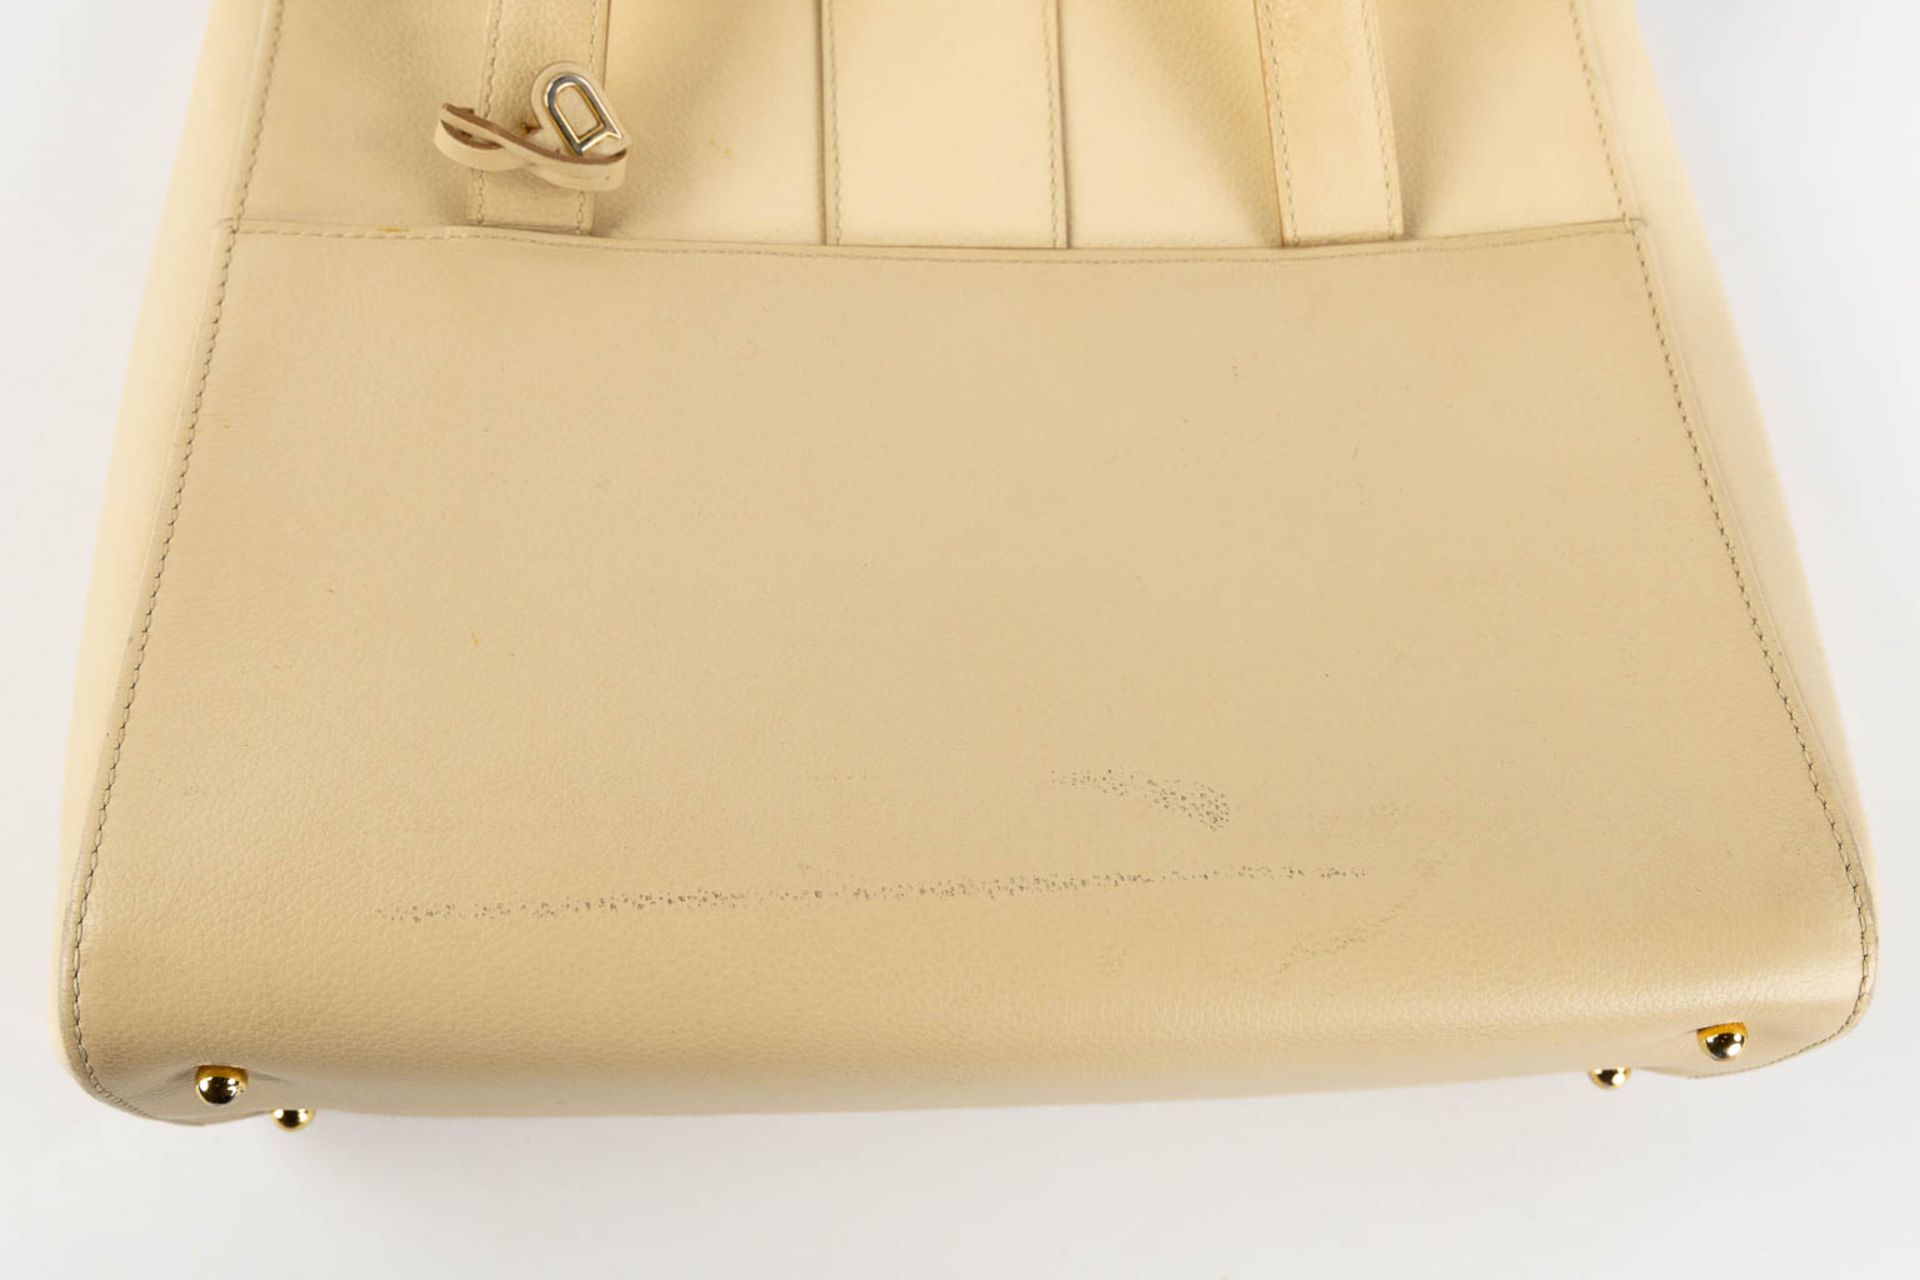 Delvaux model 'Reverie' Jumping, Ivoire. Ivory coloured leather. (L:11 x W:28 x H:23 cm) - Image 14 of 20